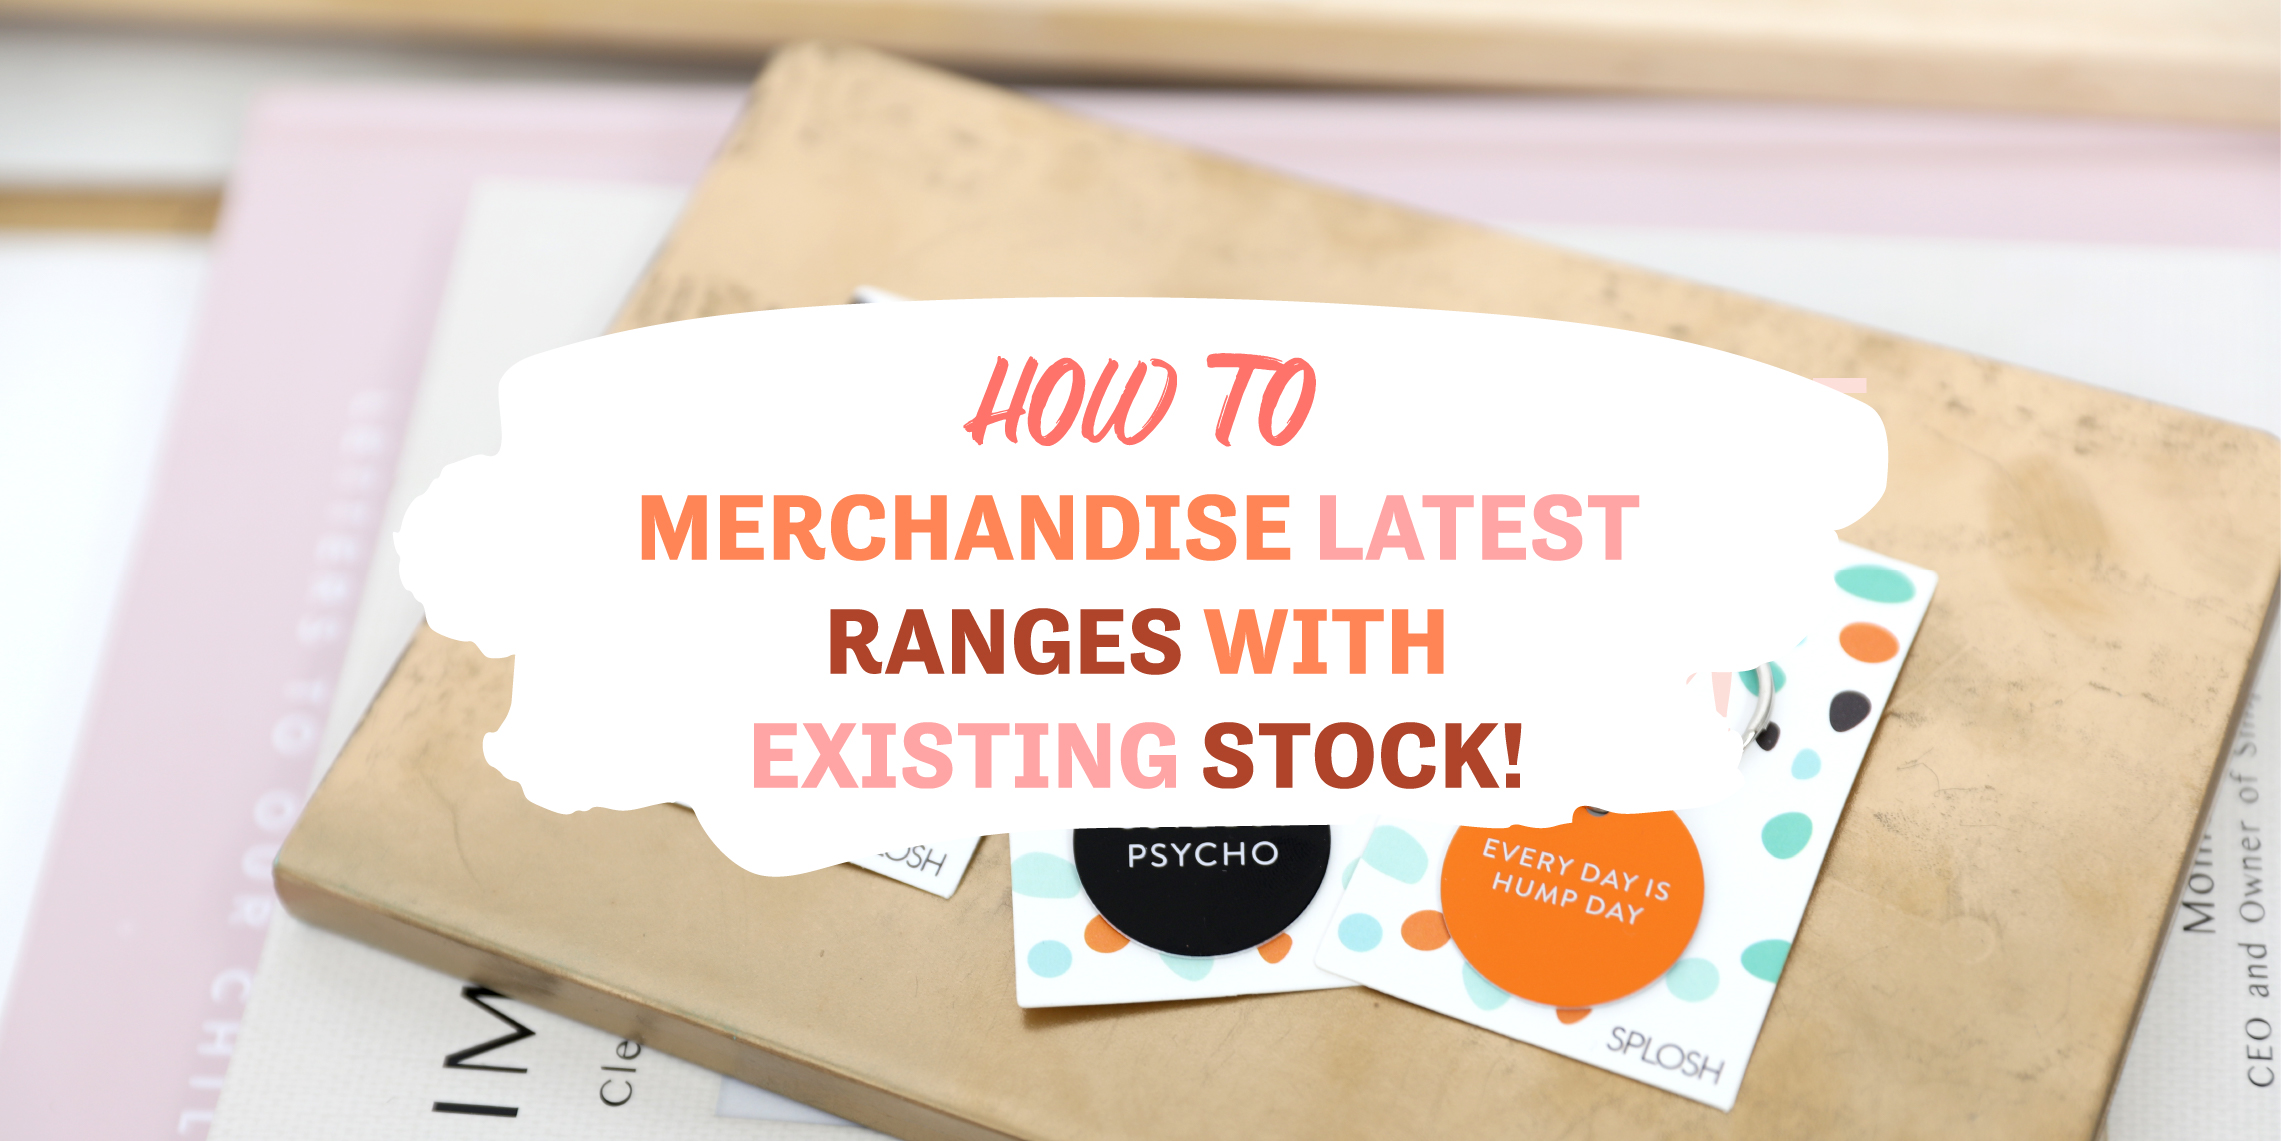 How to merchandise latest ranges with existing stock!